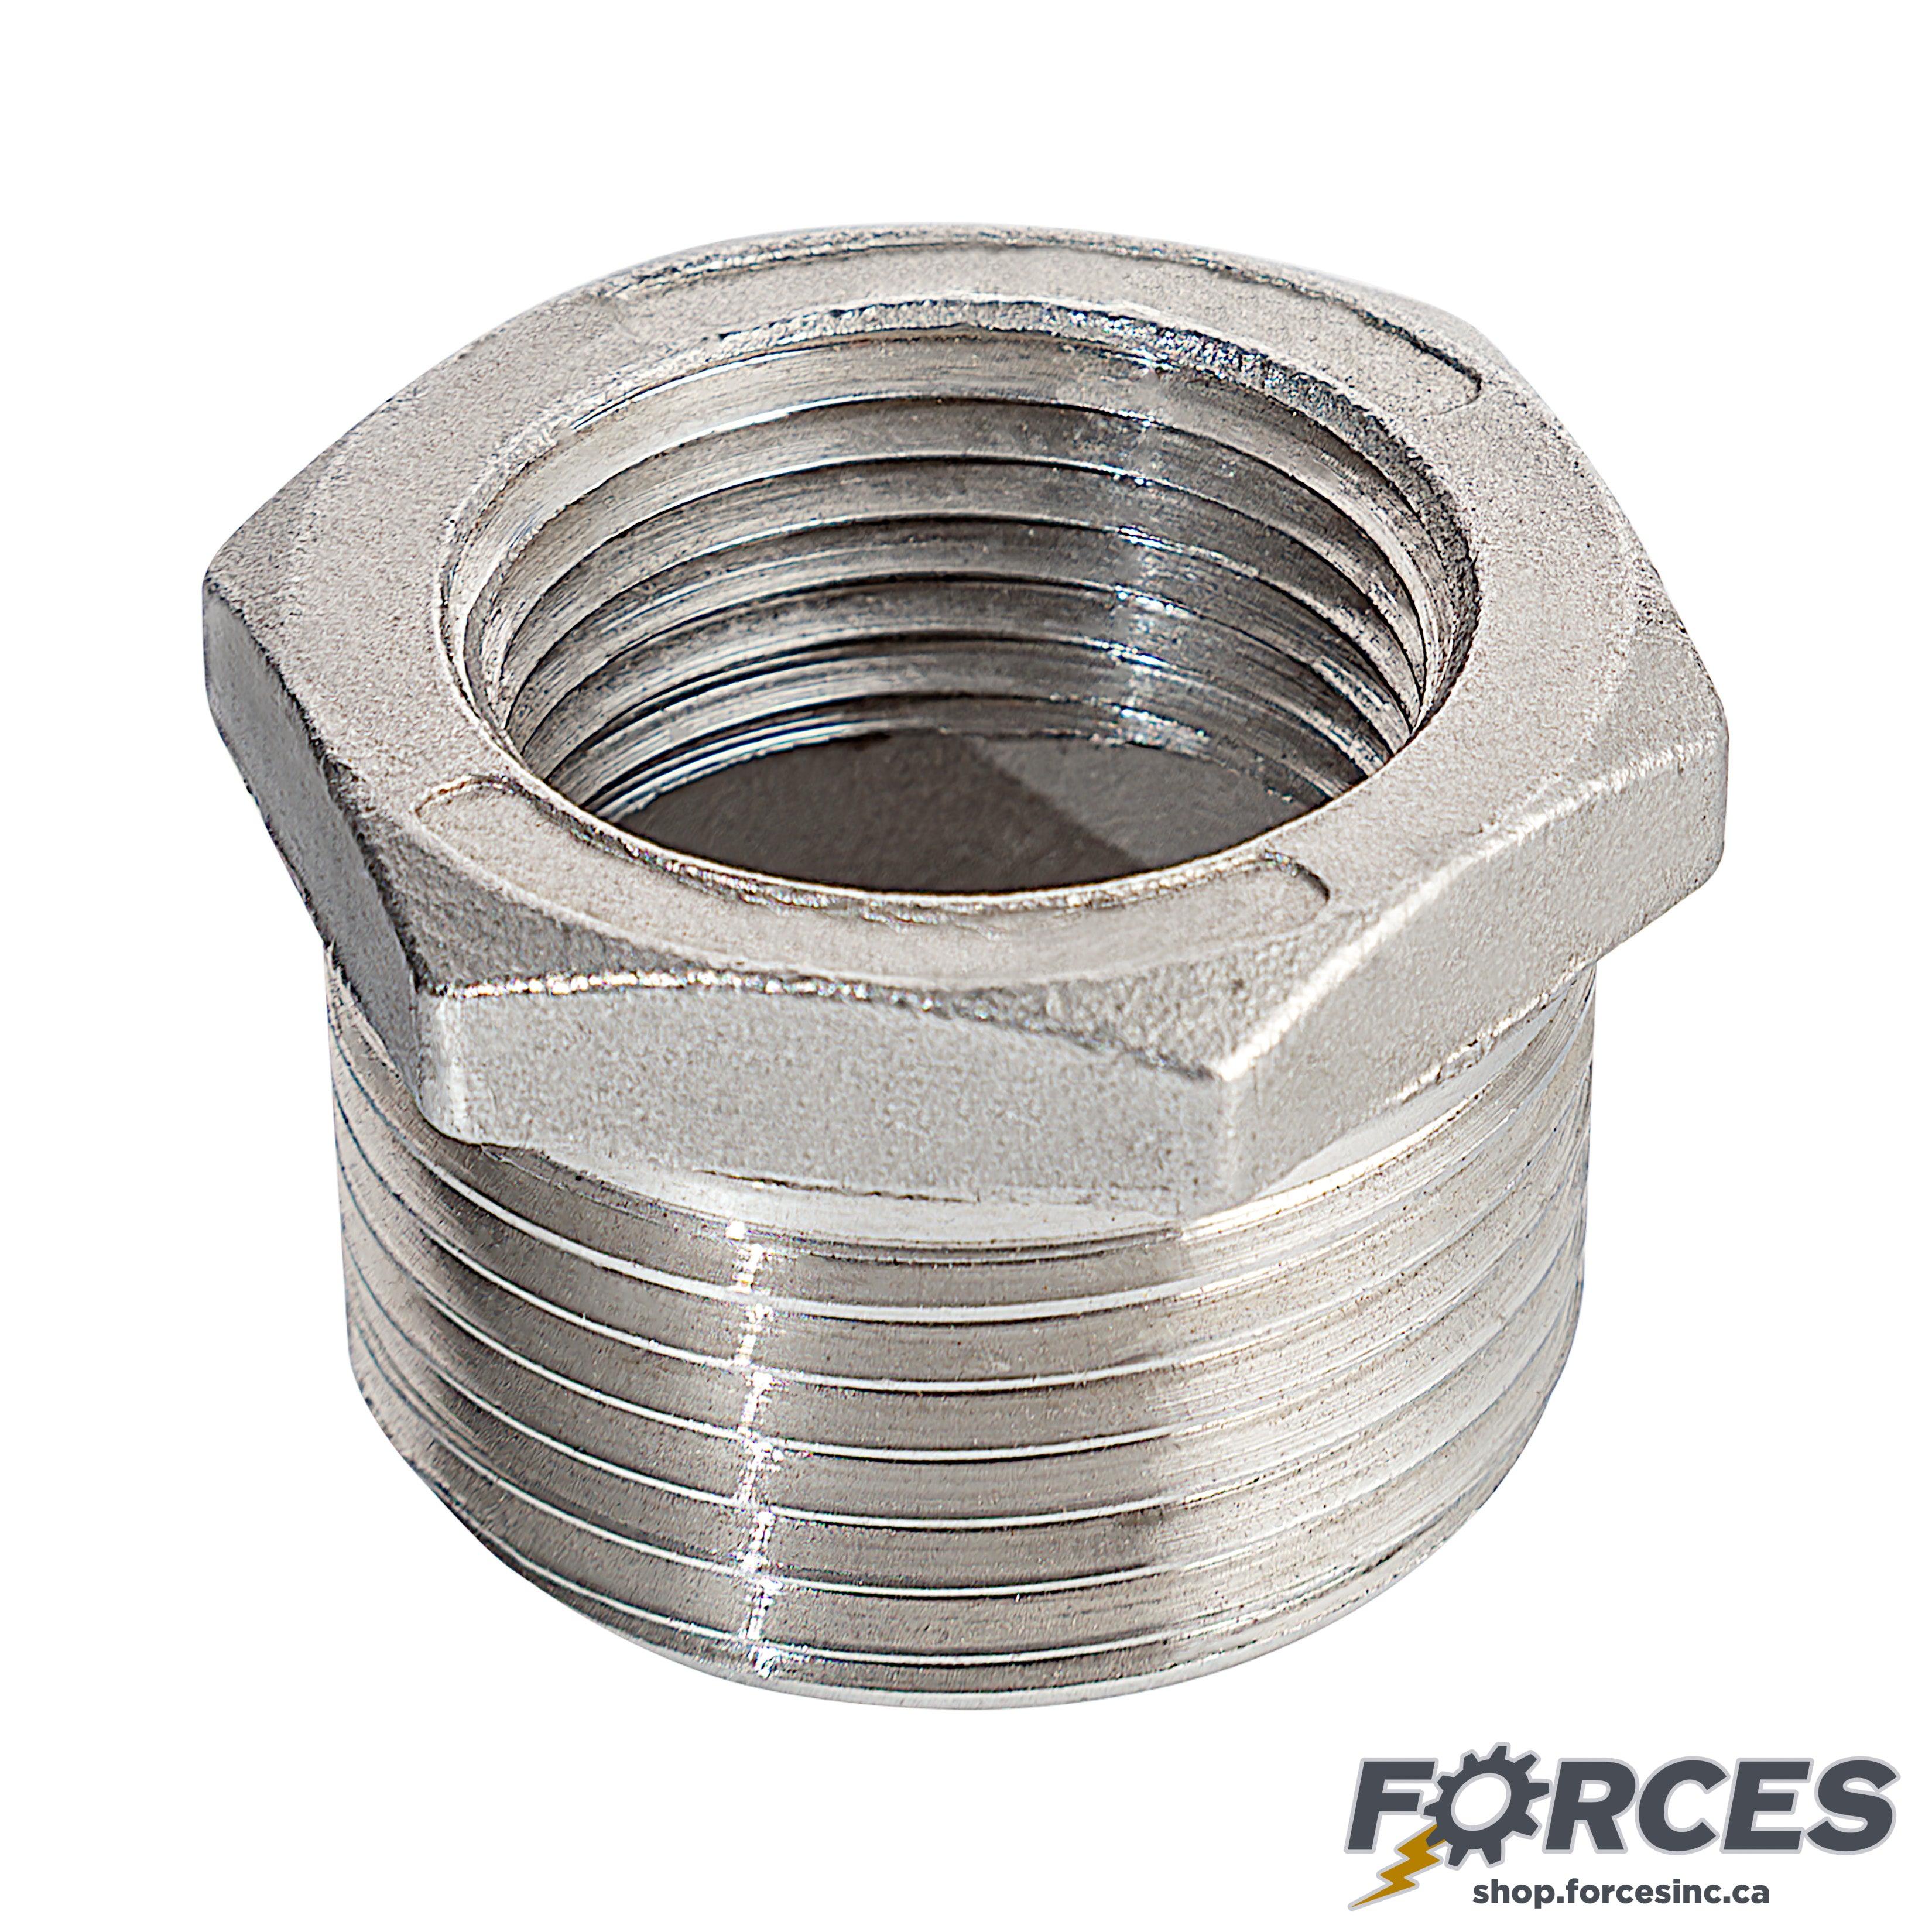 3" (M) x 2" (F) Reducing Hex Bushing NPT #150 - Stainless Steel 316 - Forces Inc